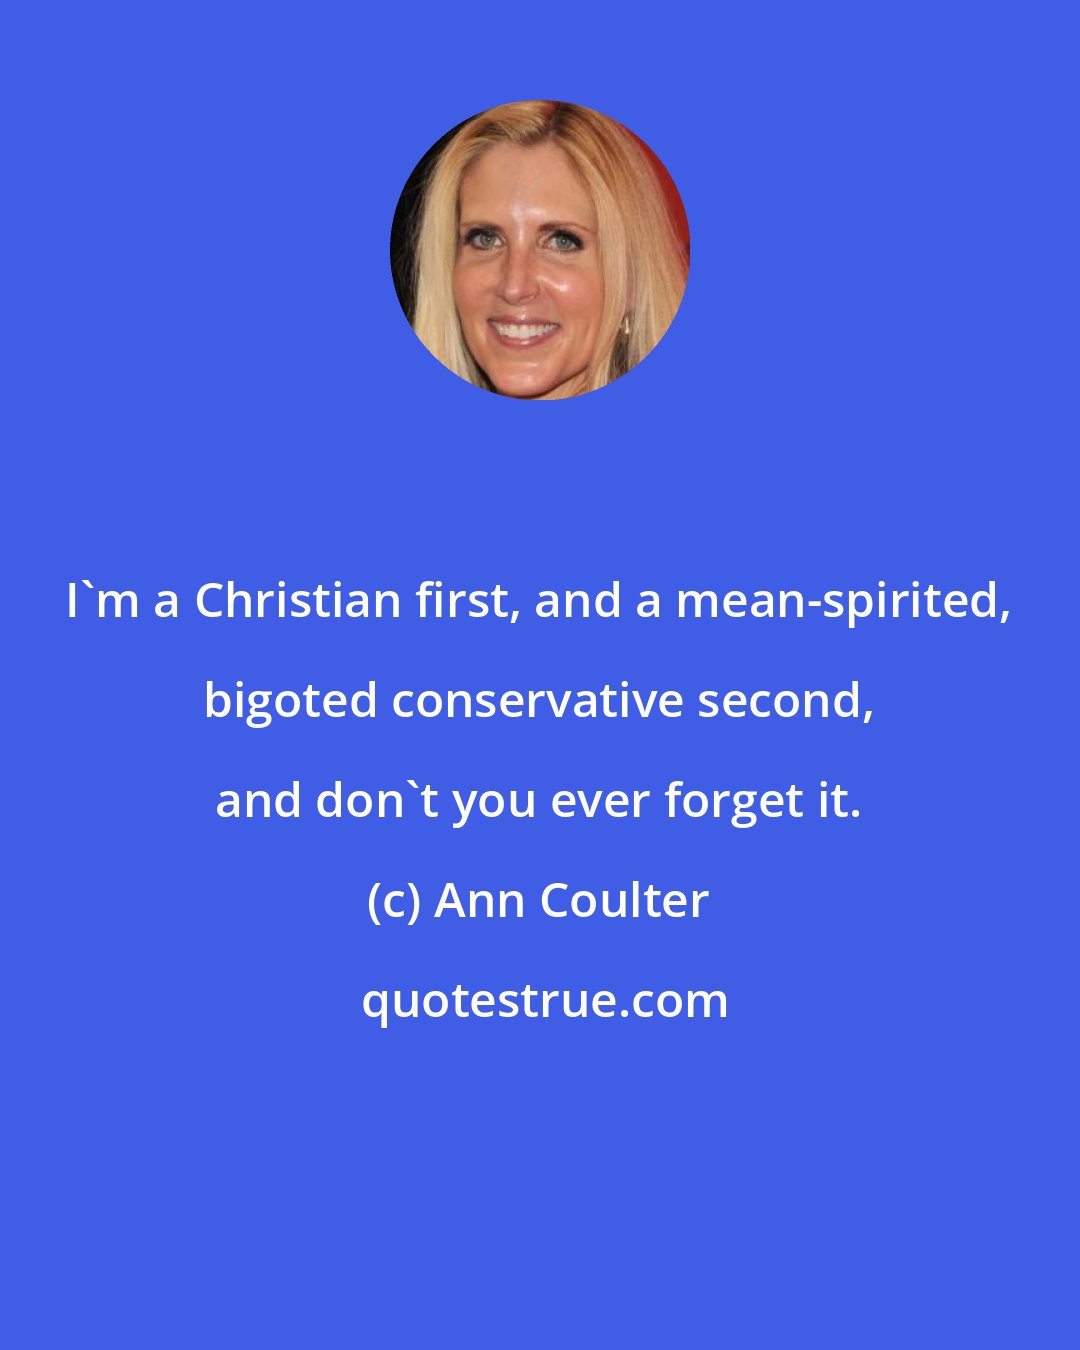 Ann Coulter: I'm a Christian first, and a mean-spirited, bigoted conservative second, and don't you ever forget it.